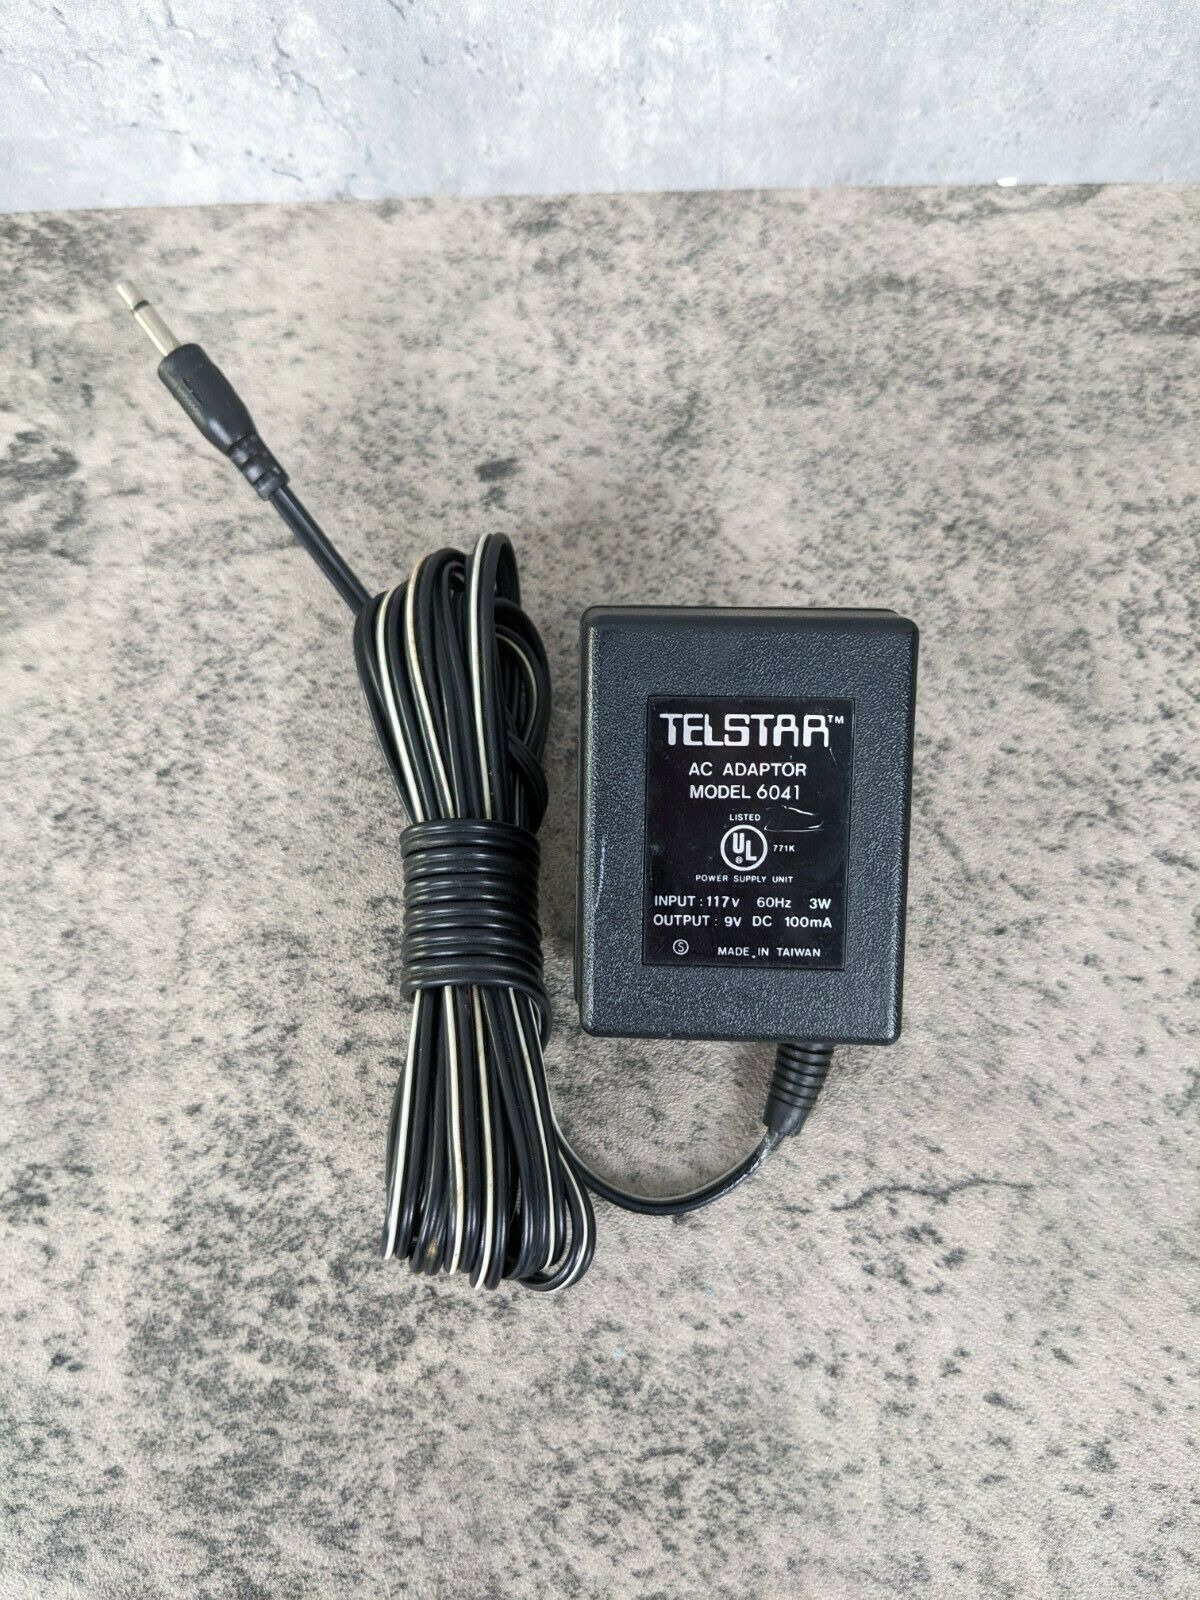 Vintage Coleco Telstar AC Adapter 6041 Original Power Cord Tested Brand: Coleco Type: AC/DC Adapter Compat